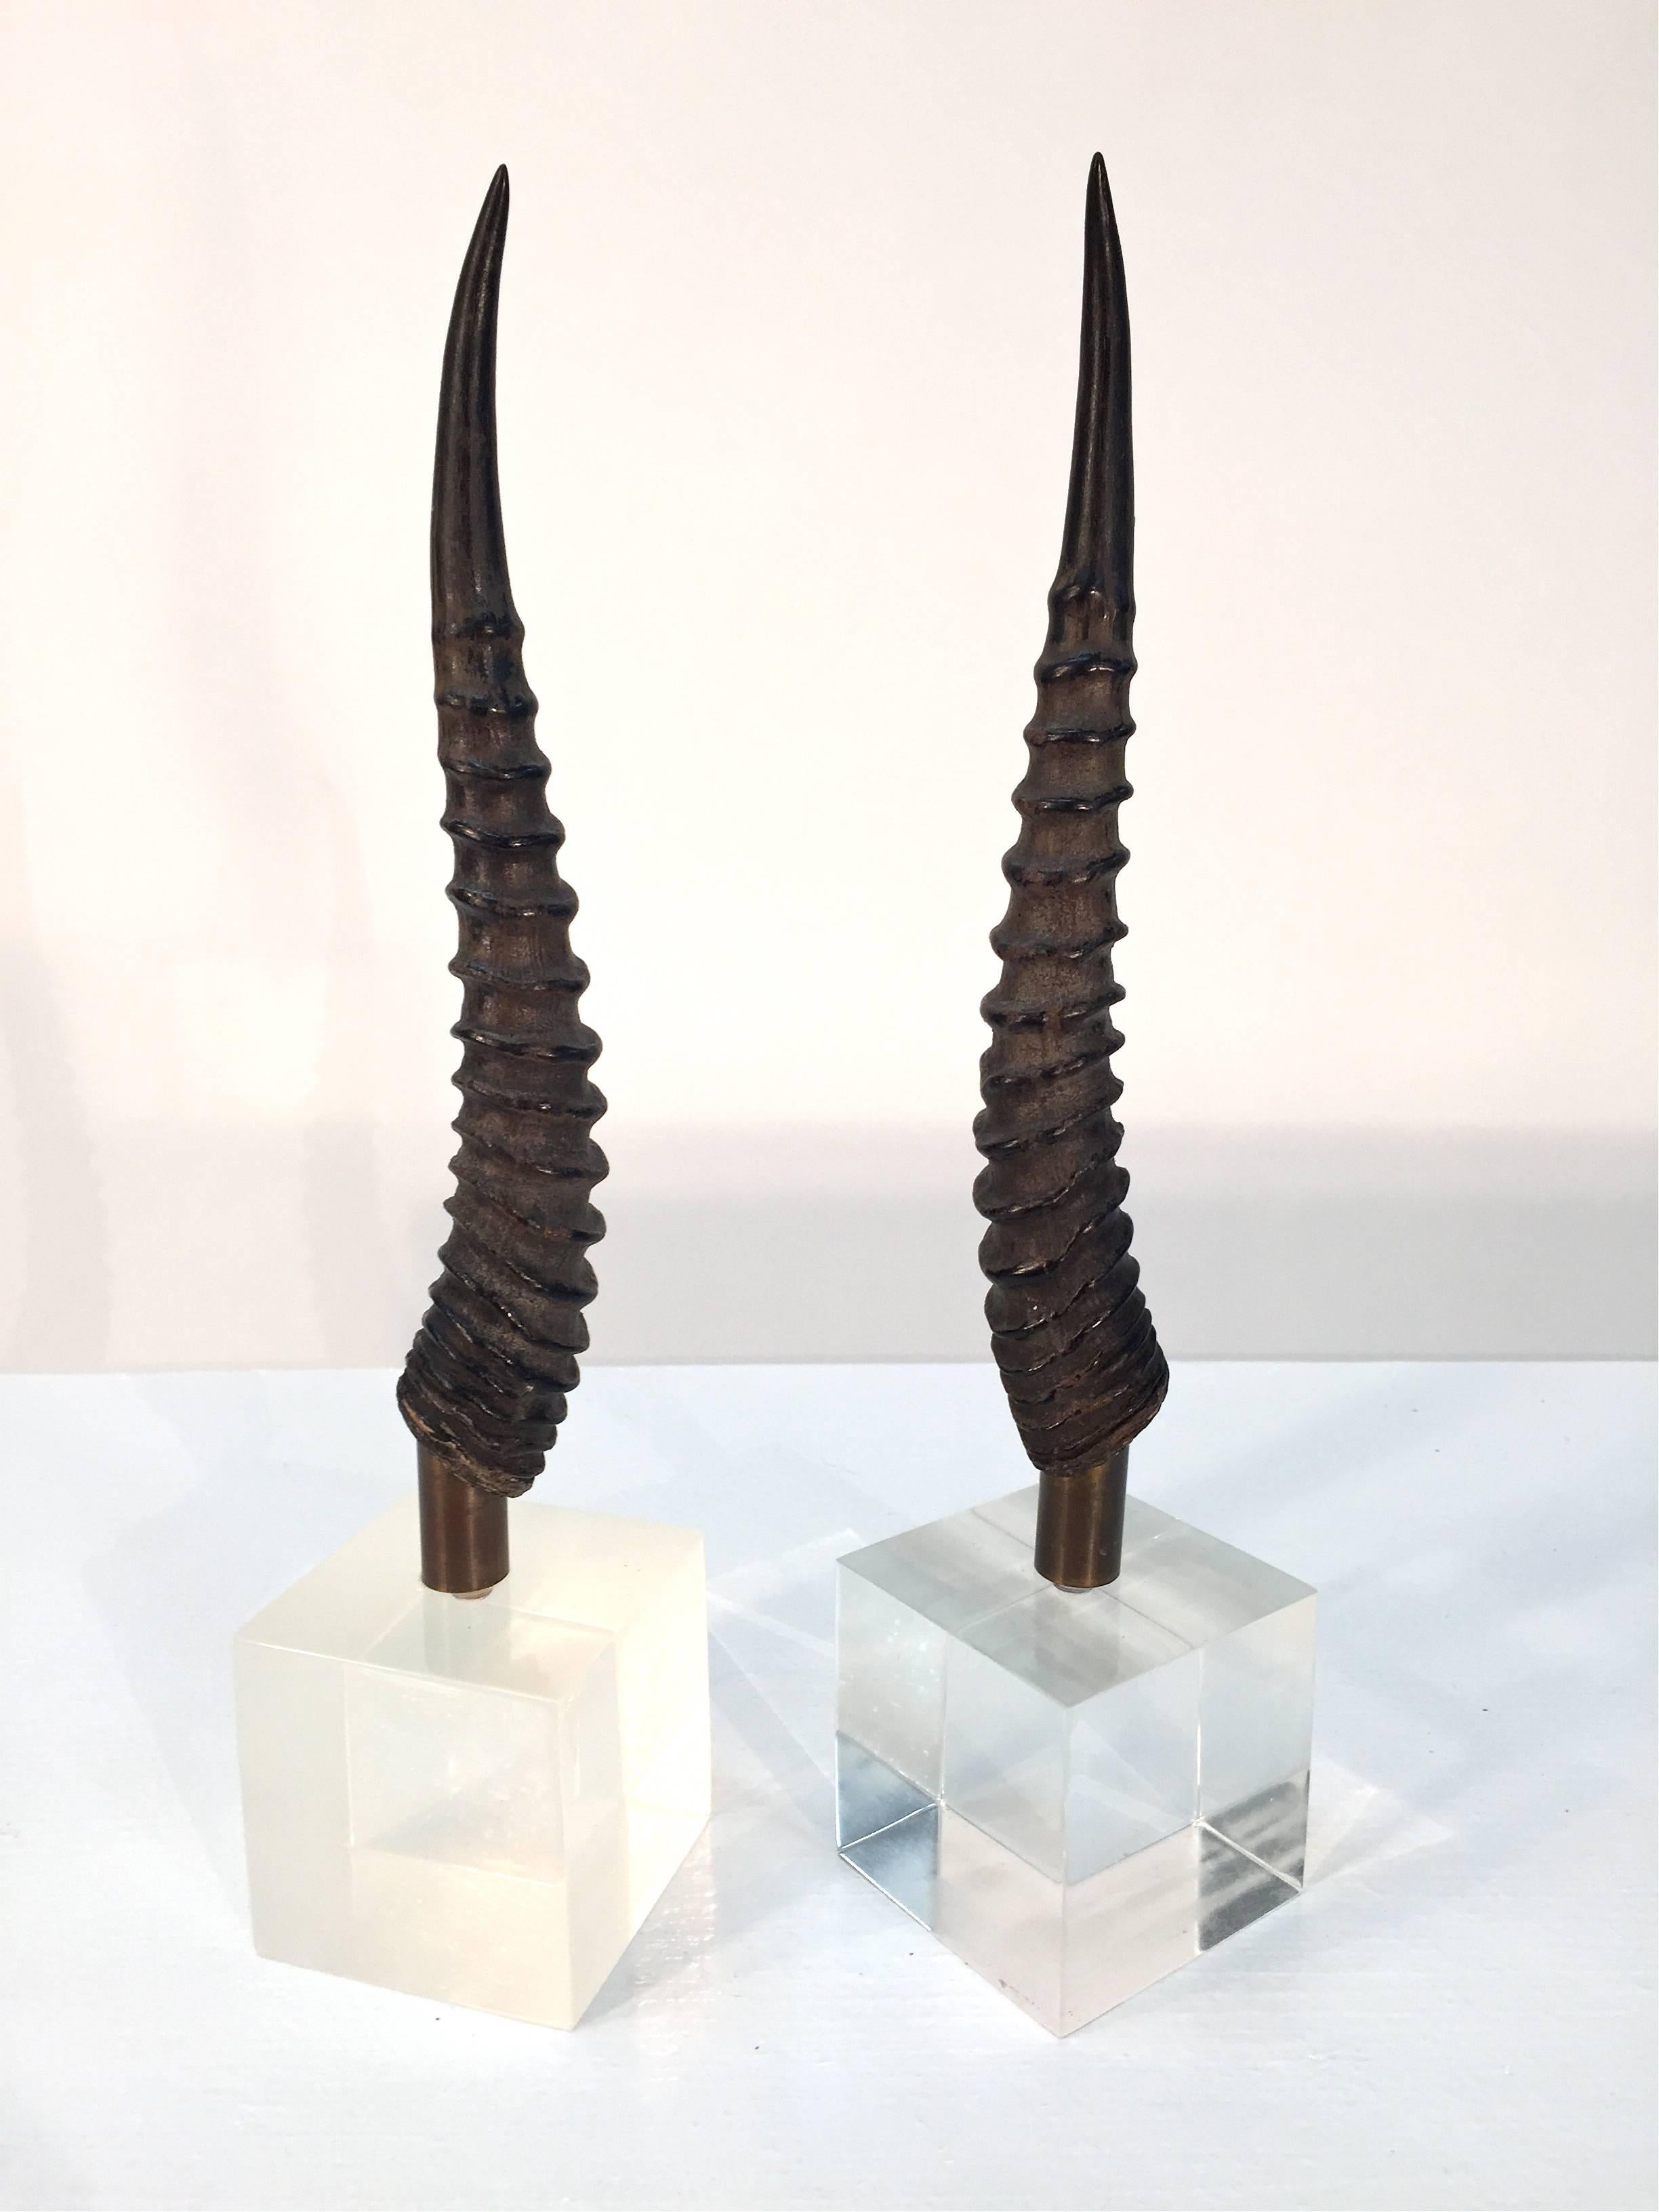 Pair of gazelle horns each mounted on a Lucite base.